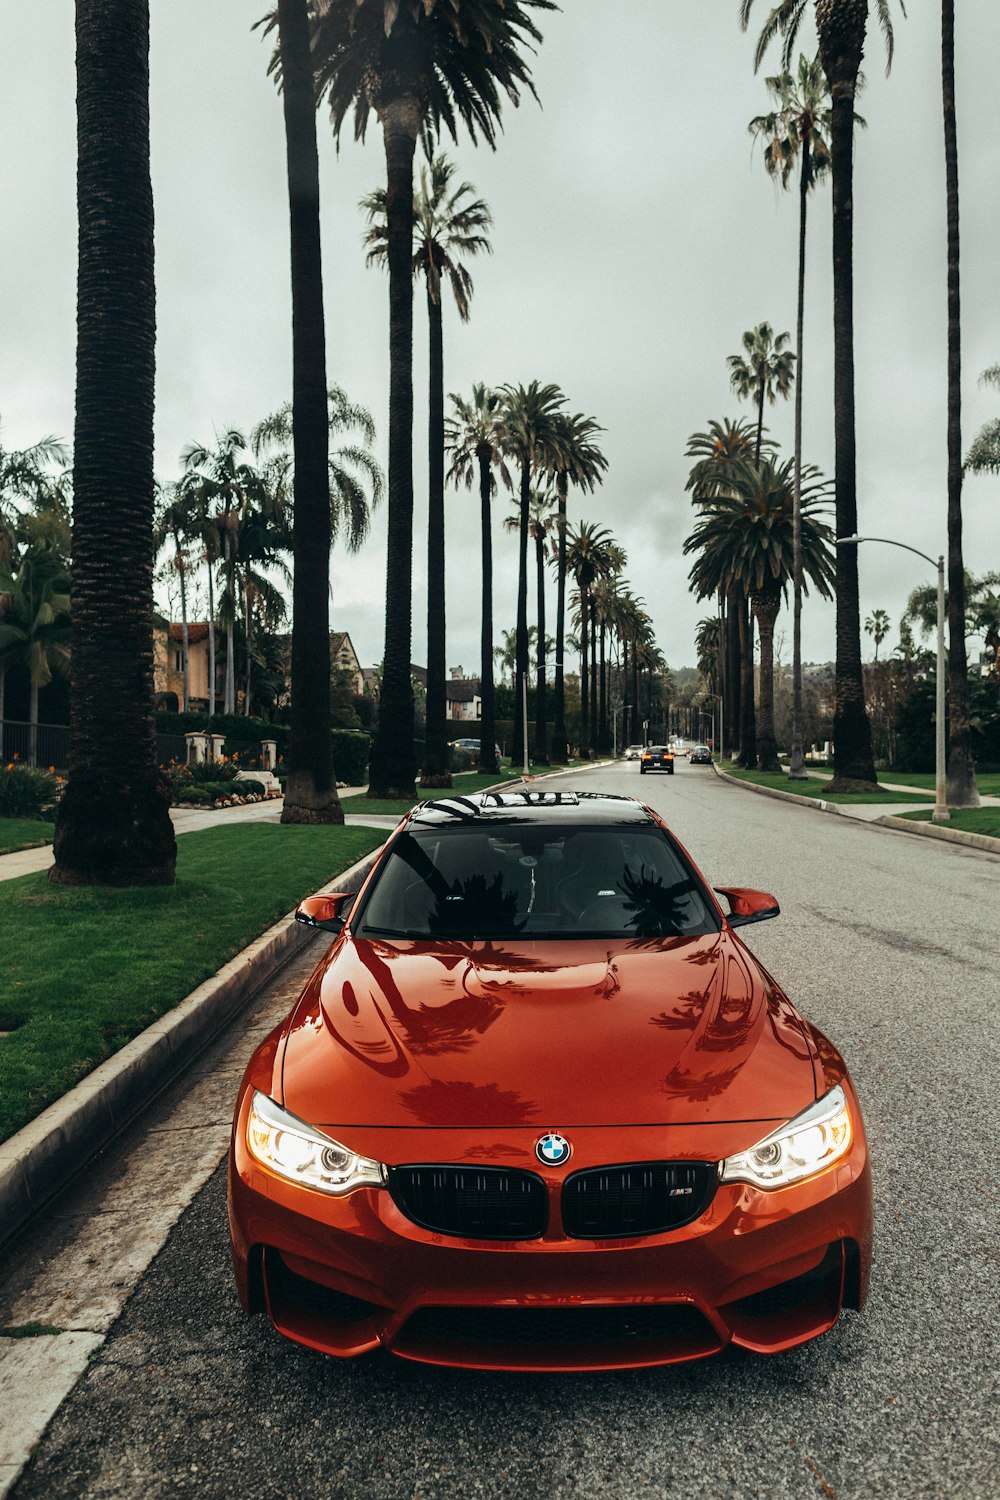 Bmw Pictures HD Download Free Images On Unsplash